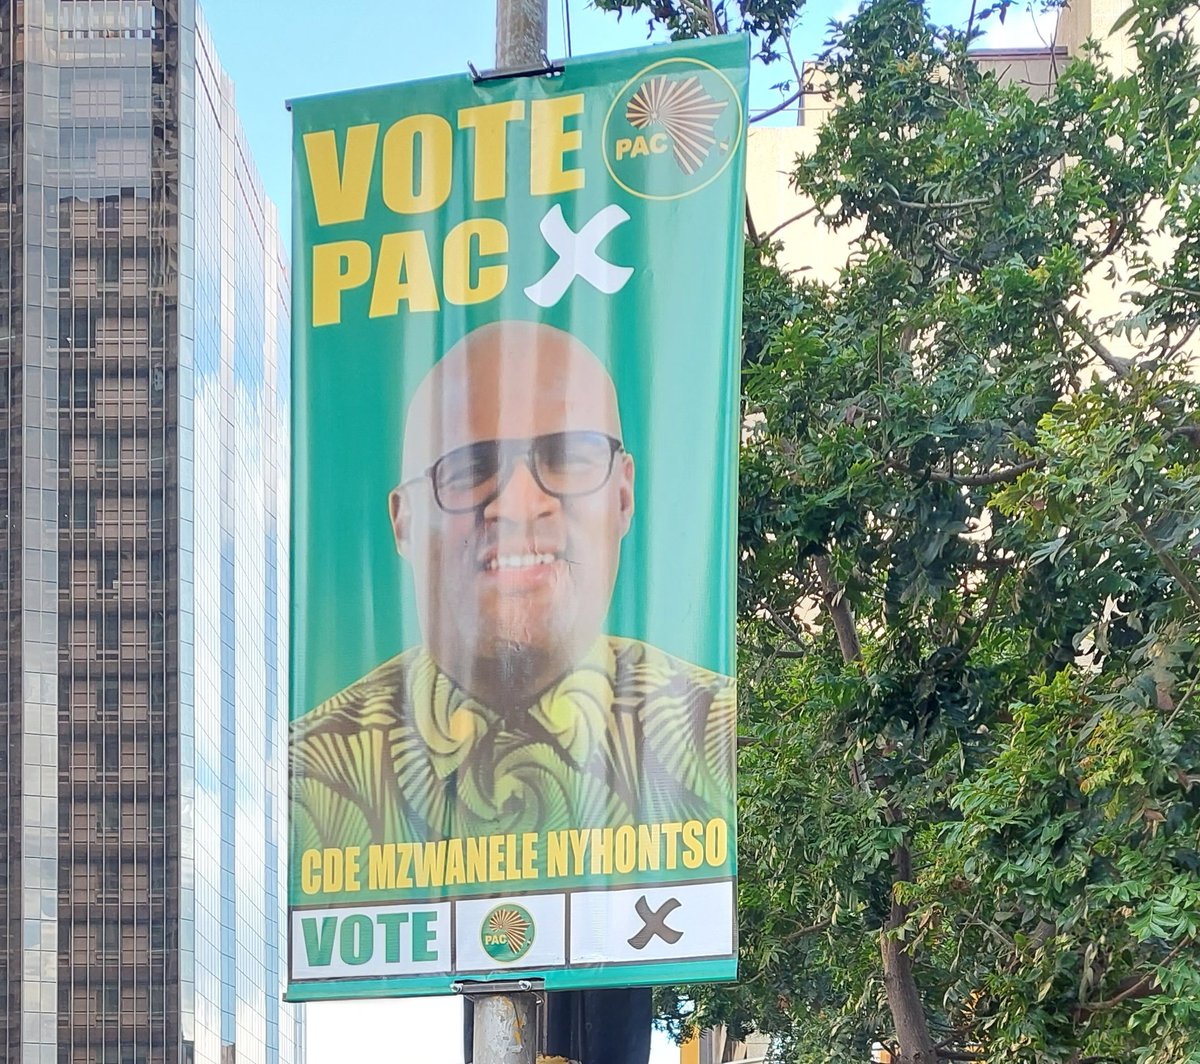 🌍 Spotted our poster at Cnr Kruis & Fox Streets, Johannesburg? Keep an eye out in the next few days, as we spread across towns in our mission to publicise our campaign for elections #PAC #VotePAC #Johannesburg